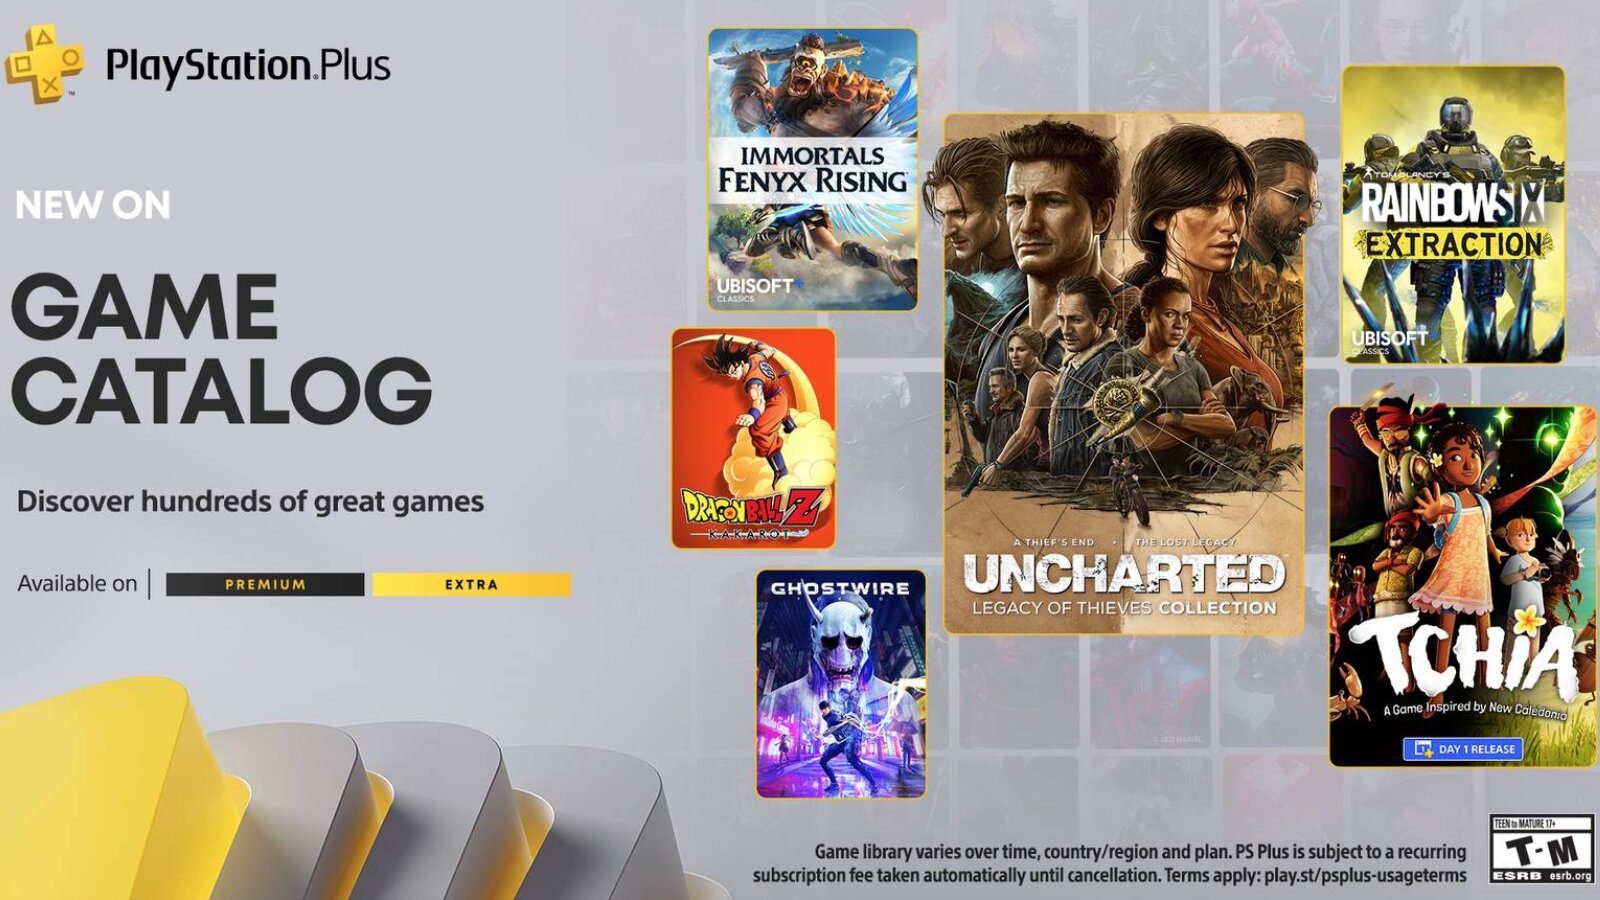 PlayStation Plus March 2023 The Full List of Games for Extra and